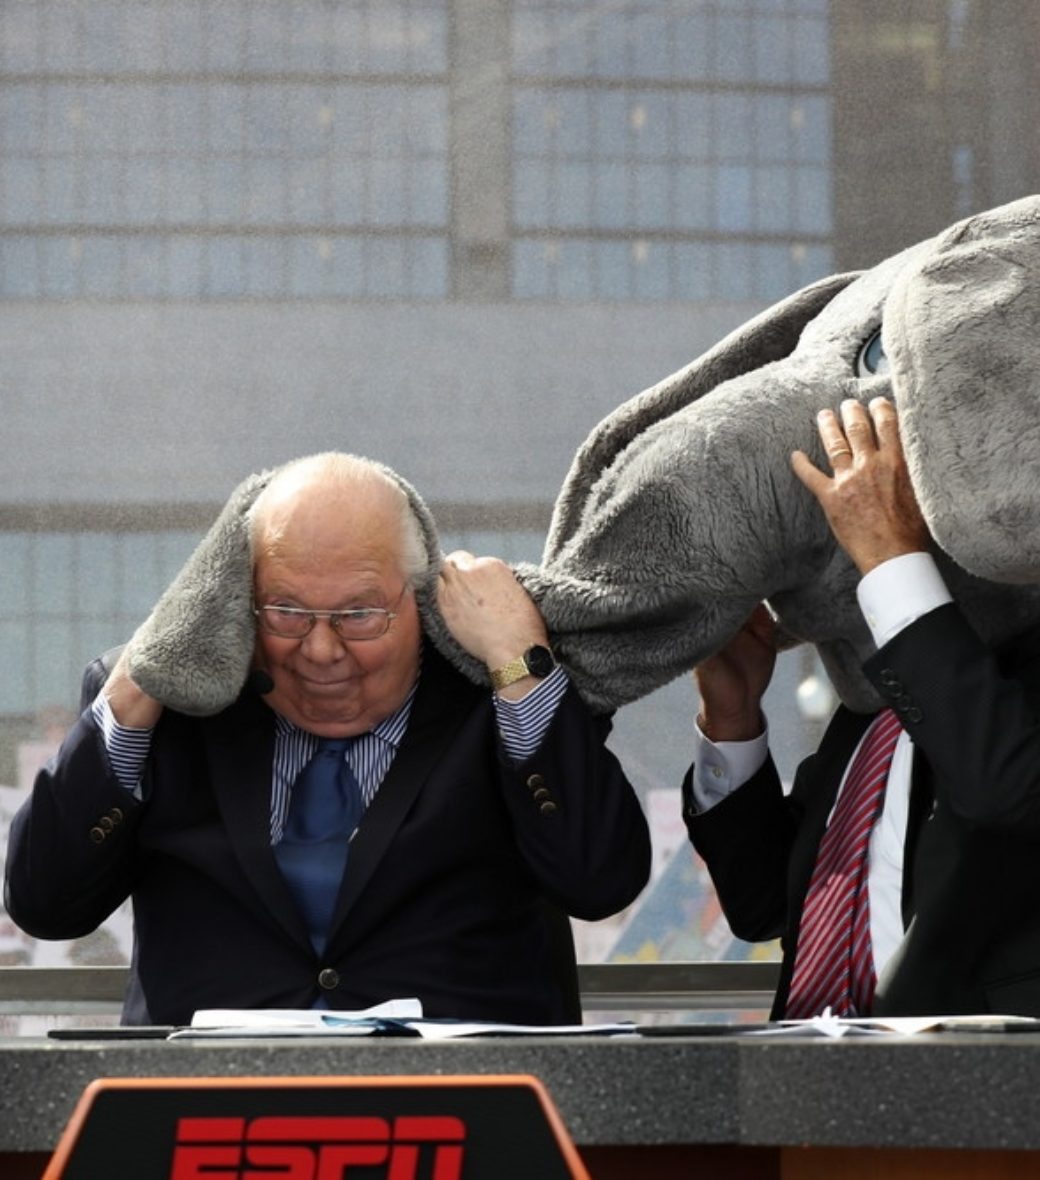 At Alabama, CBS commentator Verne Lundquist (L) was a guest picker. Having Lundquist and Corso together was a highlight, Gaiero said. (Allen Kee/ESPN Images)